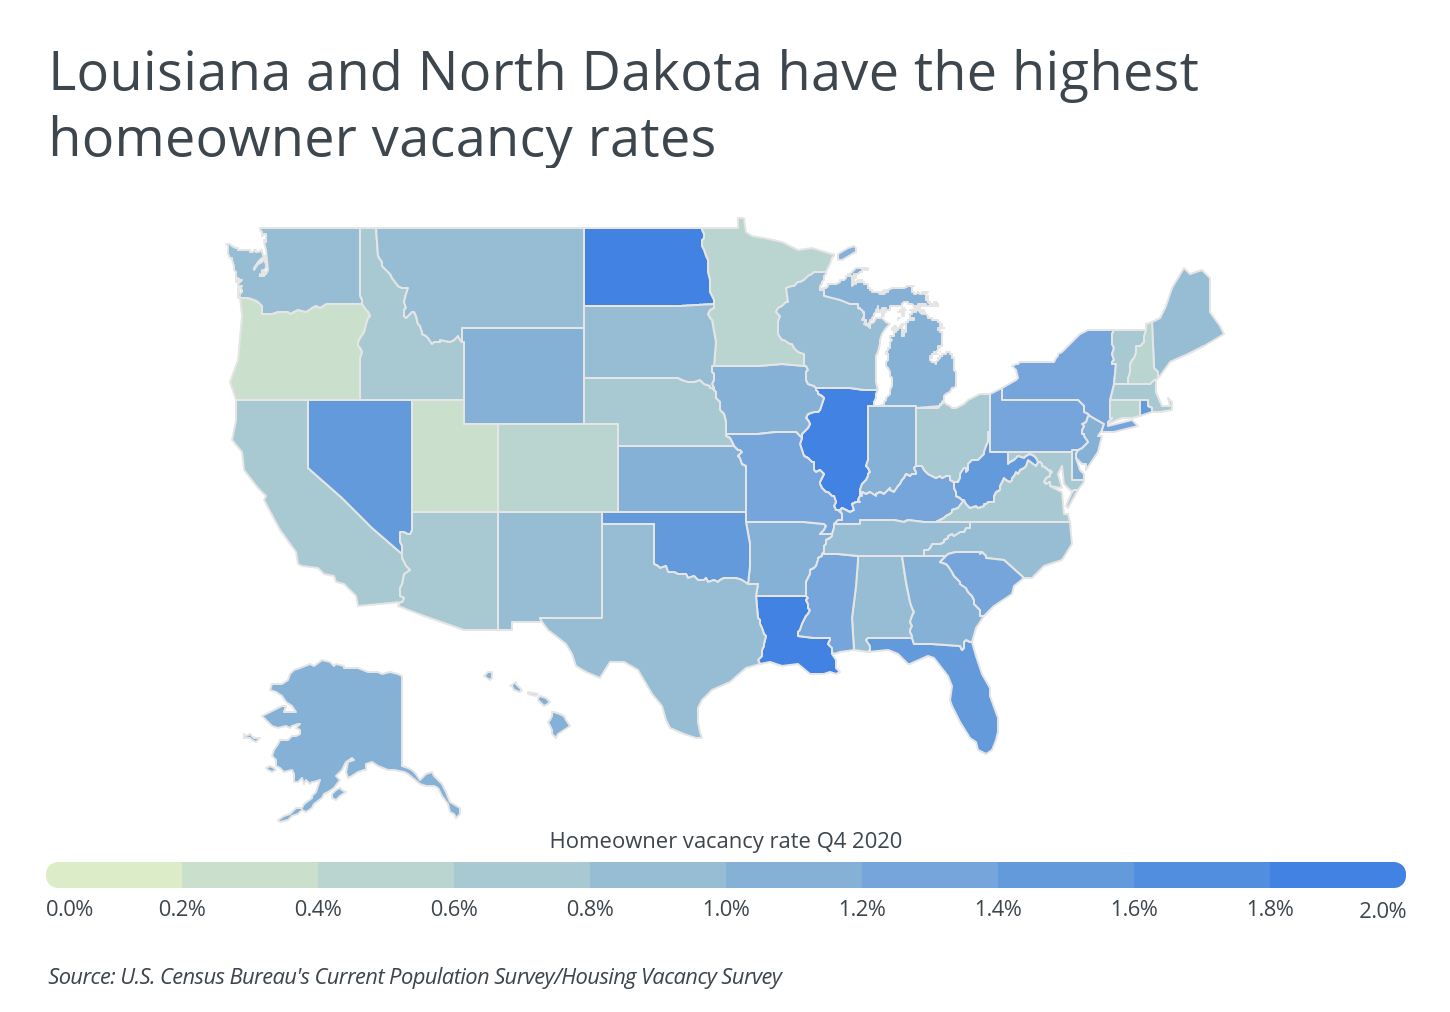 Louisiana and North Dakota have the highest homeowners vacancy rates